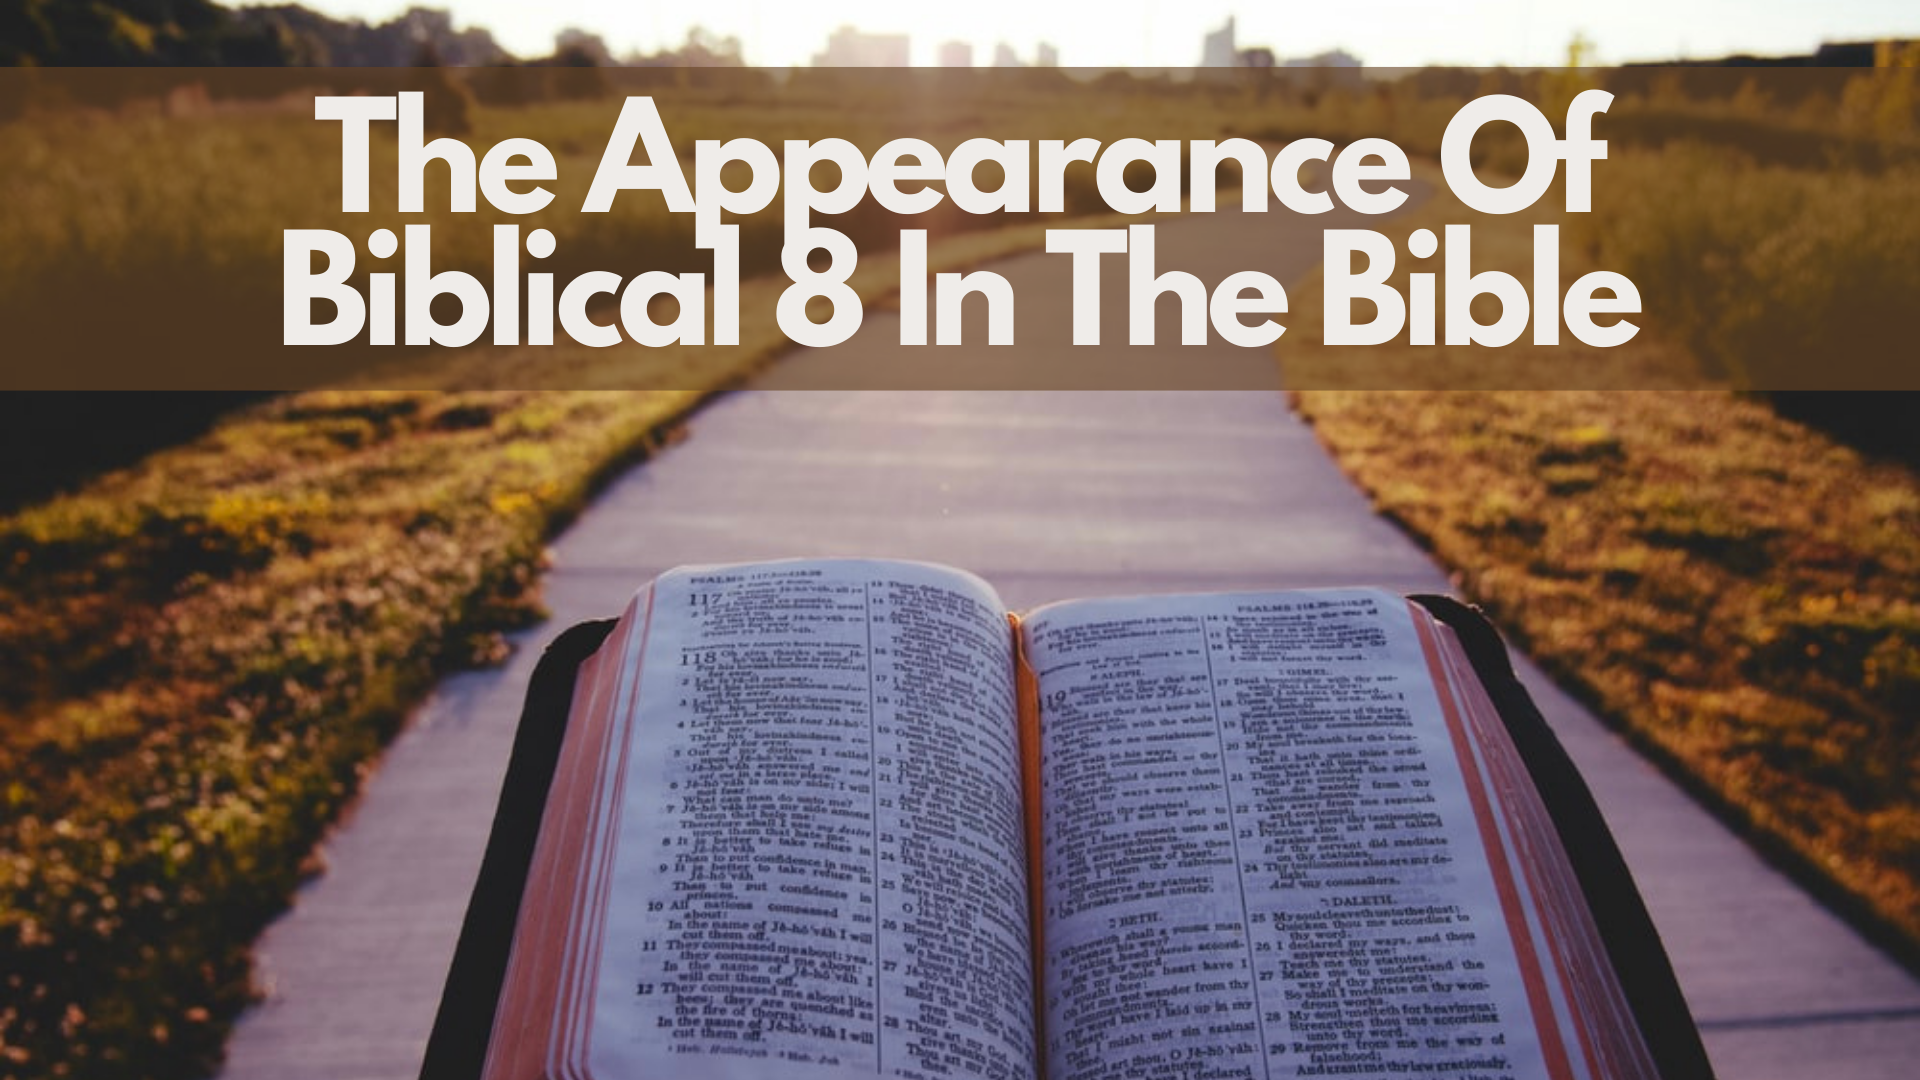 A Bible on a pathway with some grass and trees on the side and words The Appearance Of Biblical 8 In The Bible